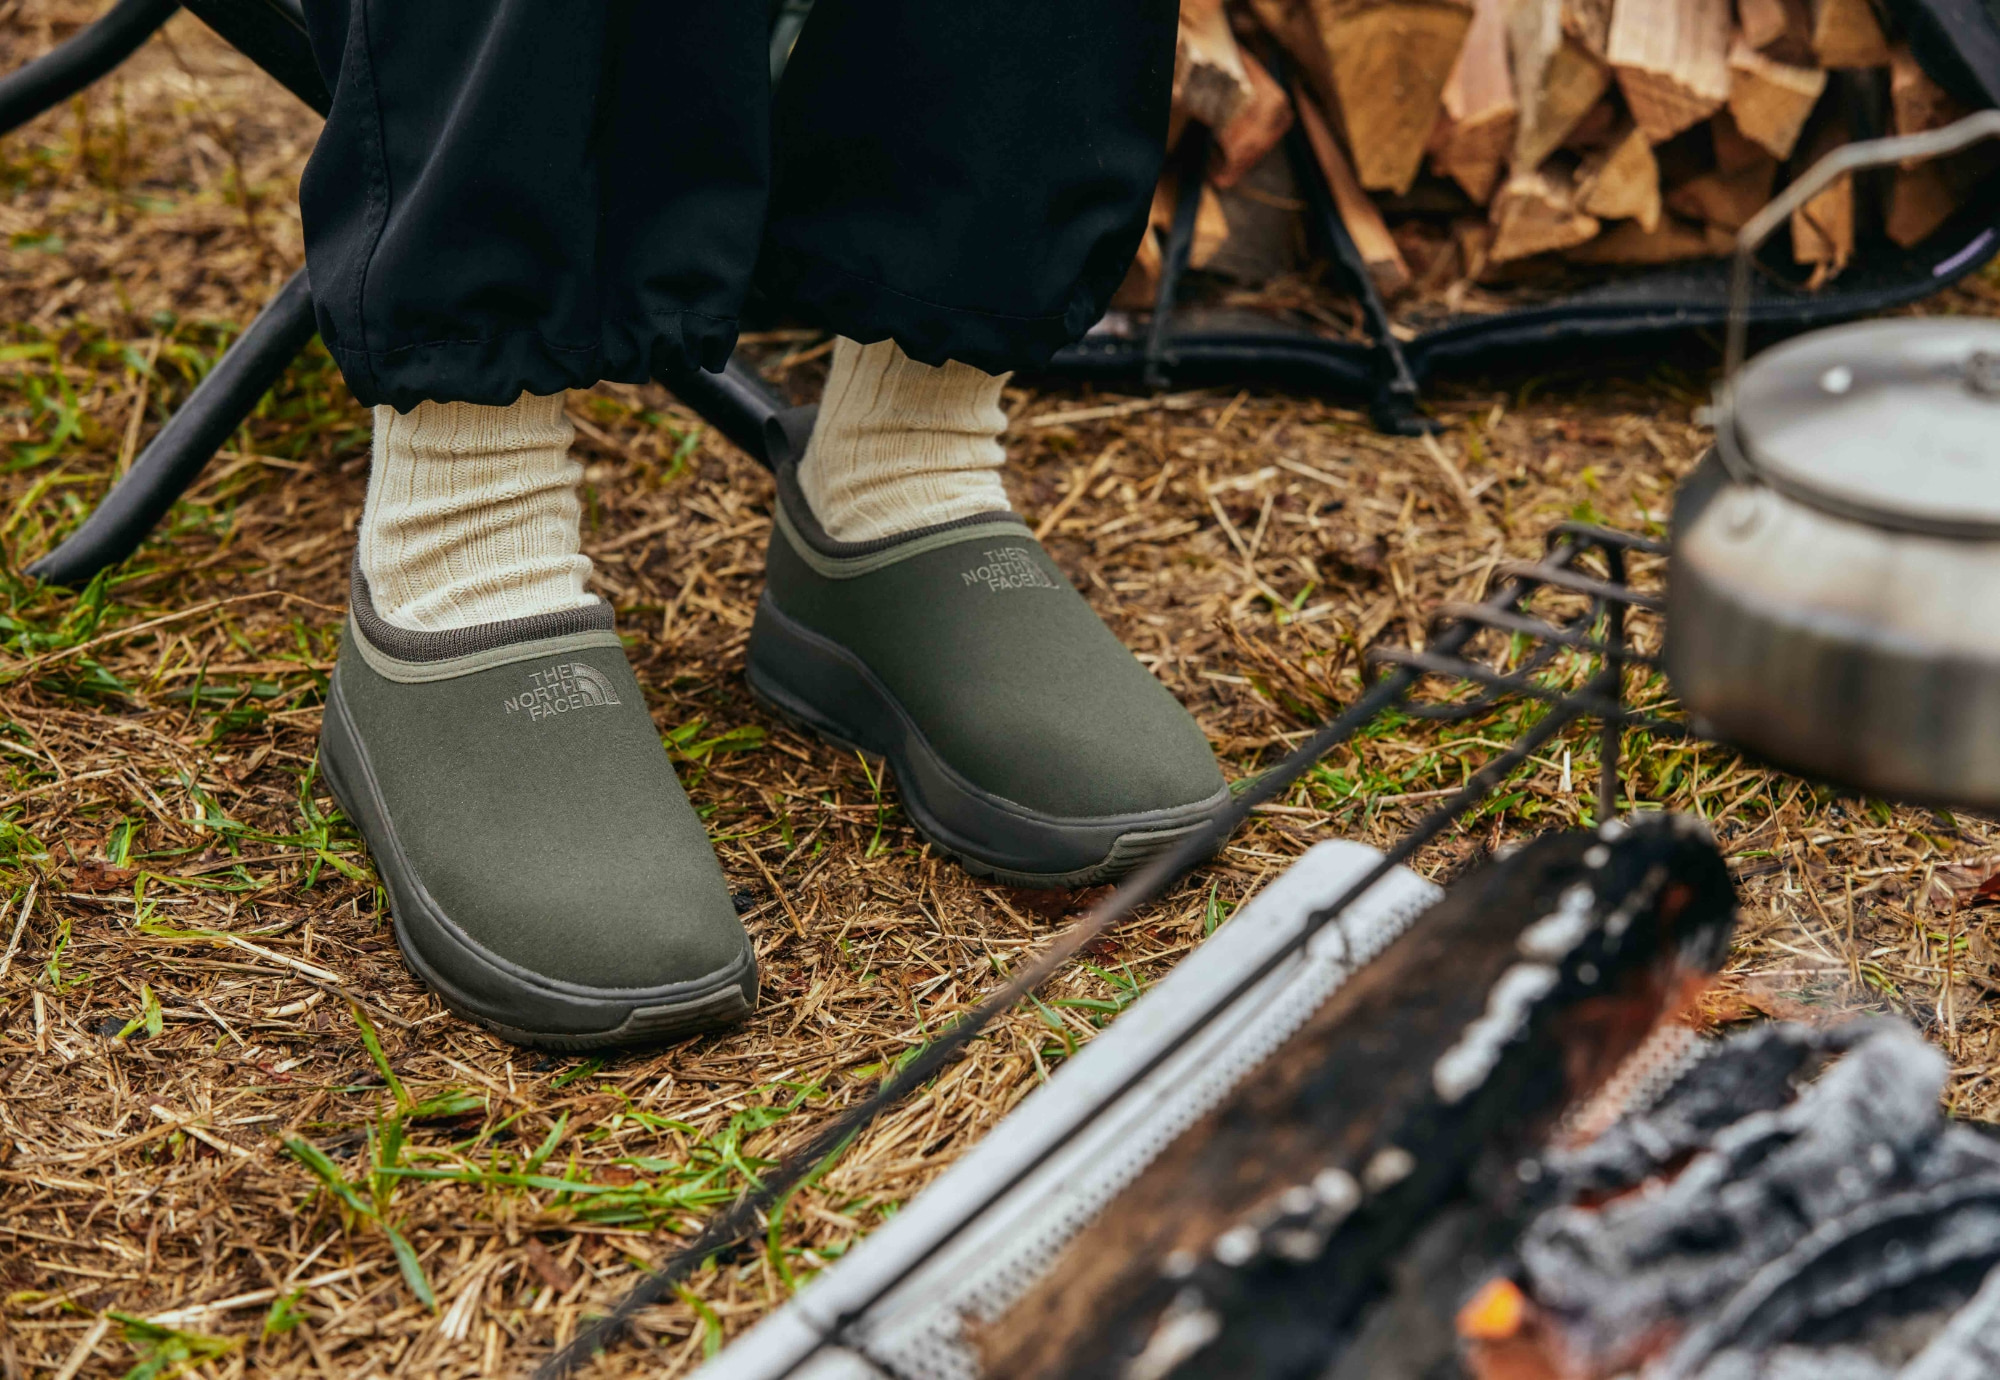 Firefly Slip-On | Online Camp Store | THE NORTH FACE CAMP